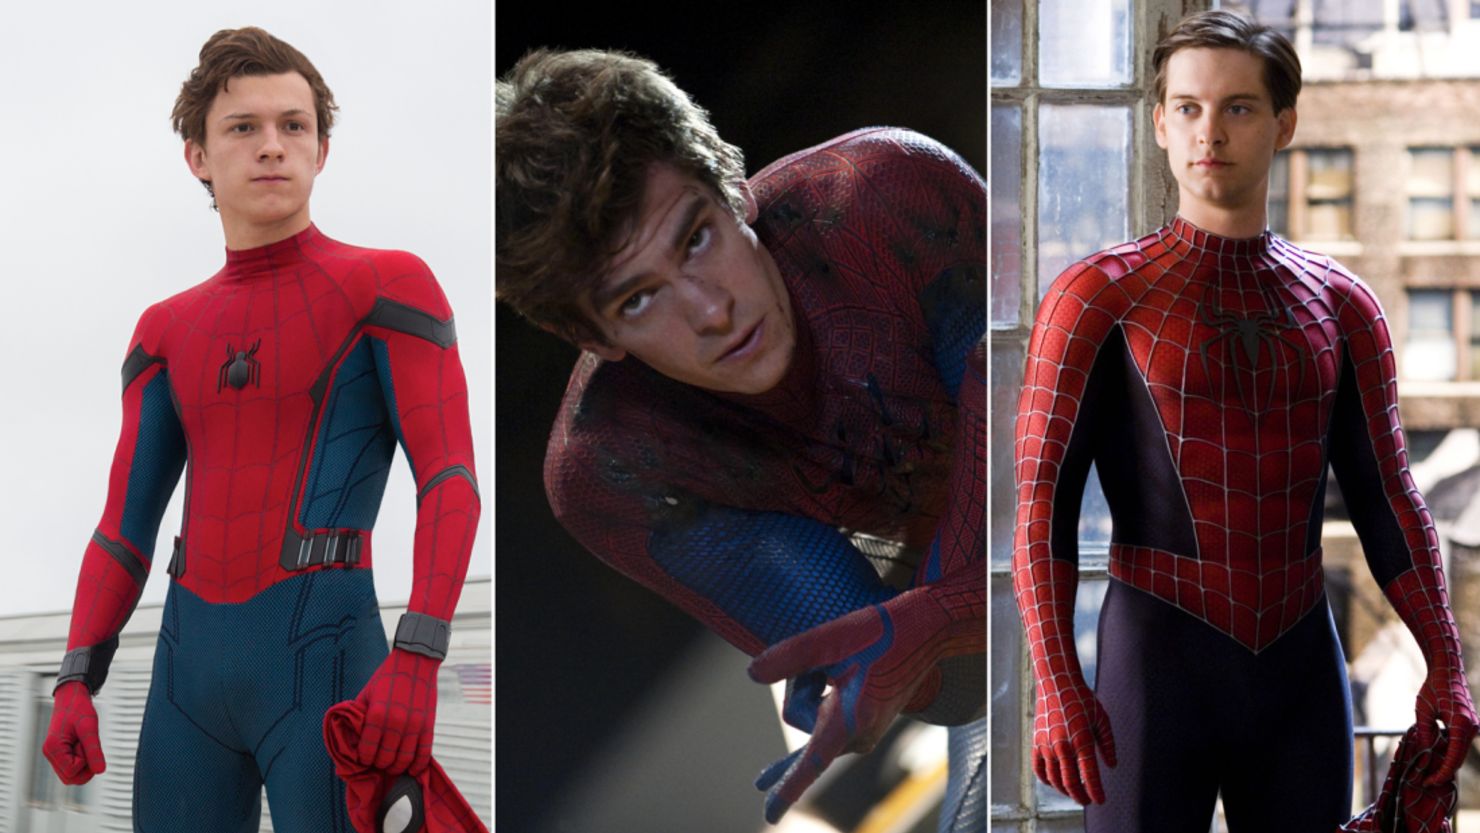 Tobey Maguire And Andrew Garfield Contributed More To Spider-Man